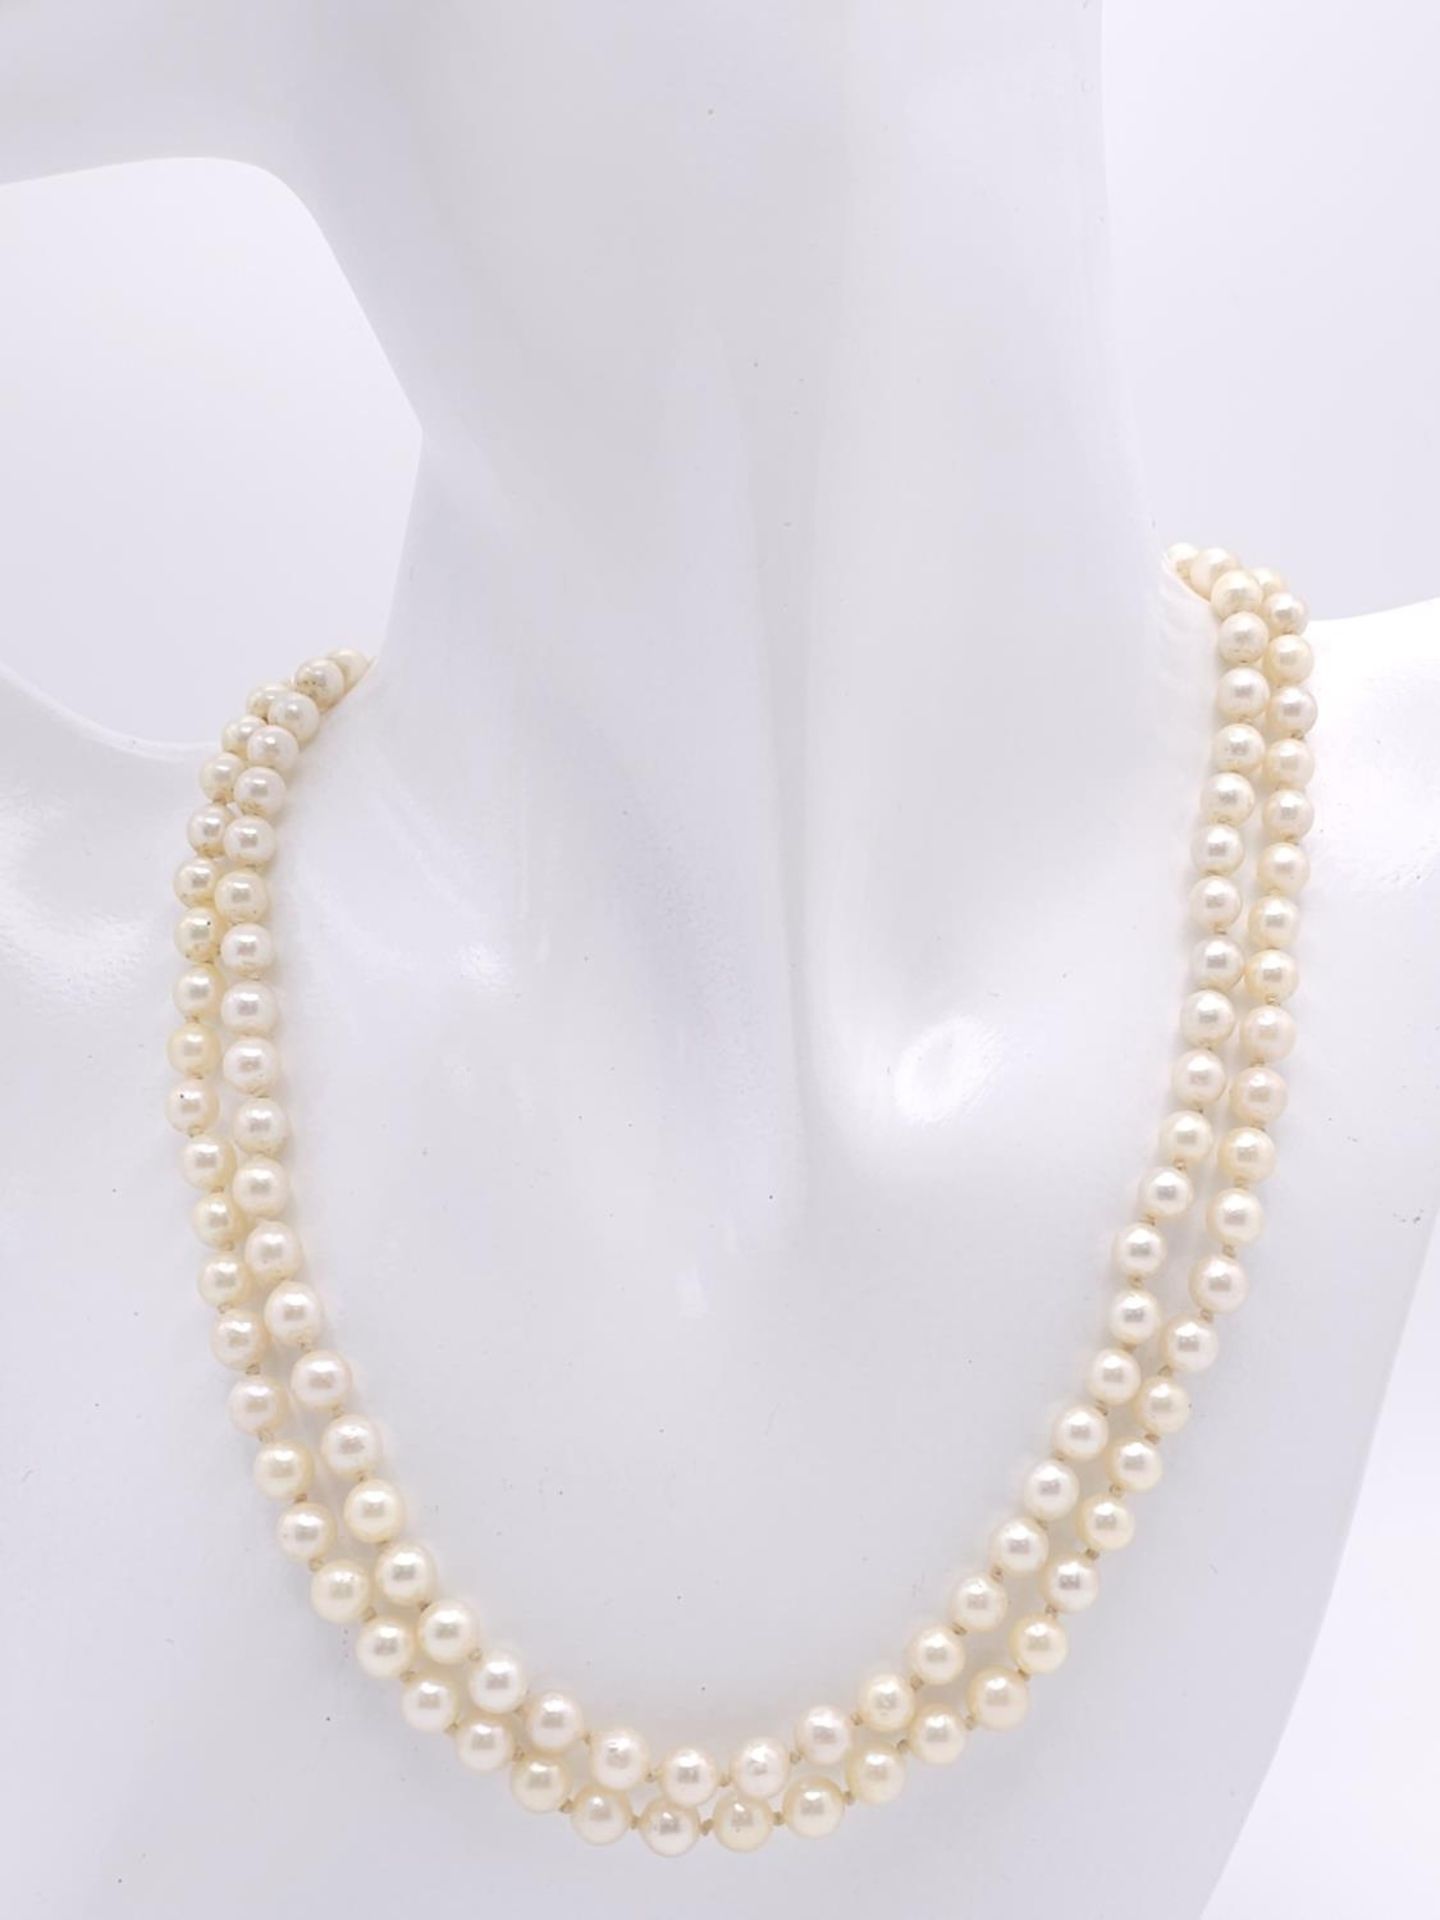 A Vintage Two Row Pearl Choker Necklace with a 14K Gold Clasp. 38cm. - Image 5 of 6